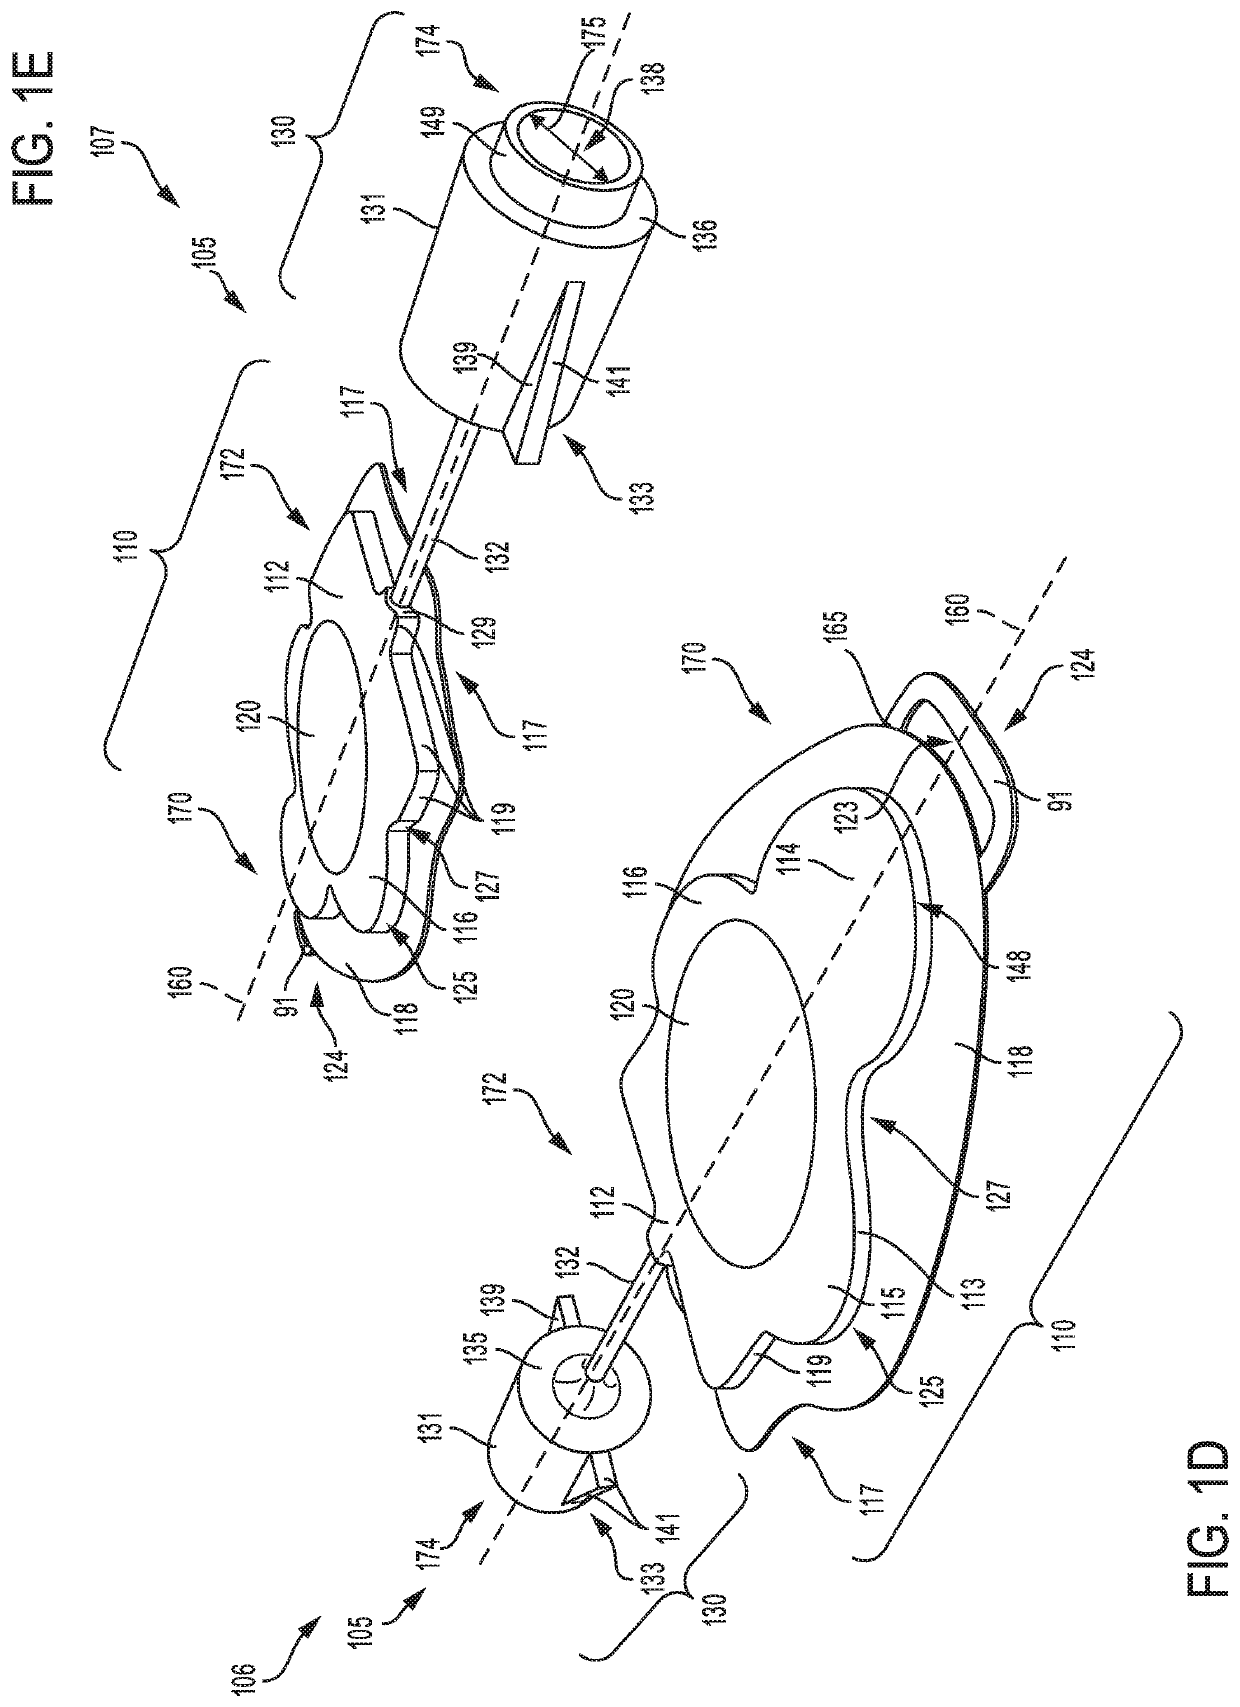 Device and method for sterilizing a catheter system